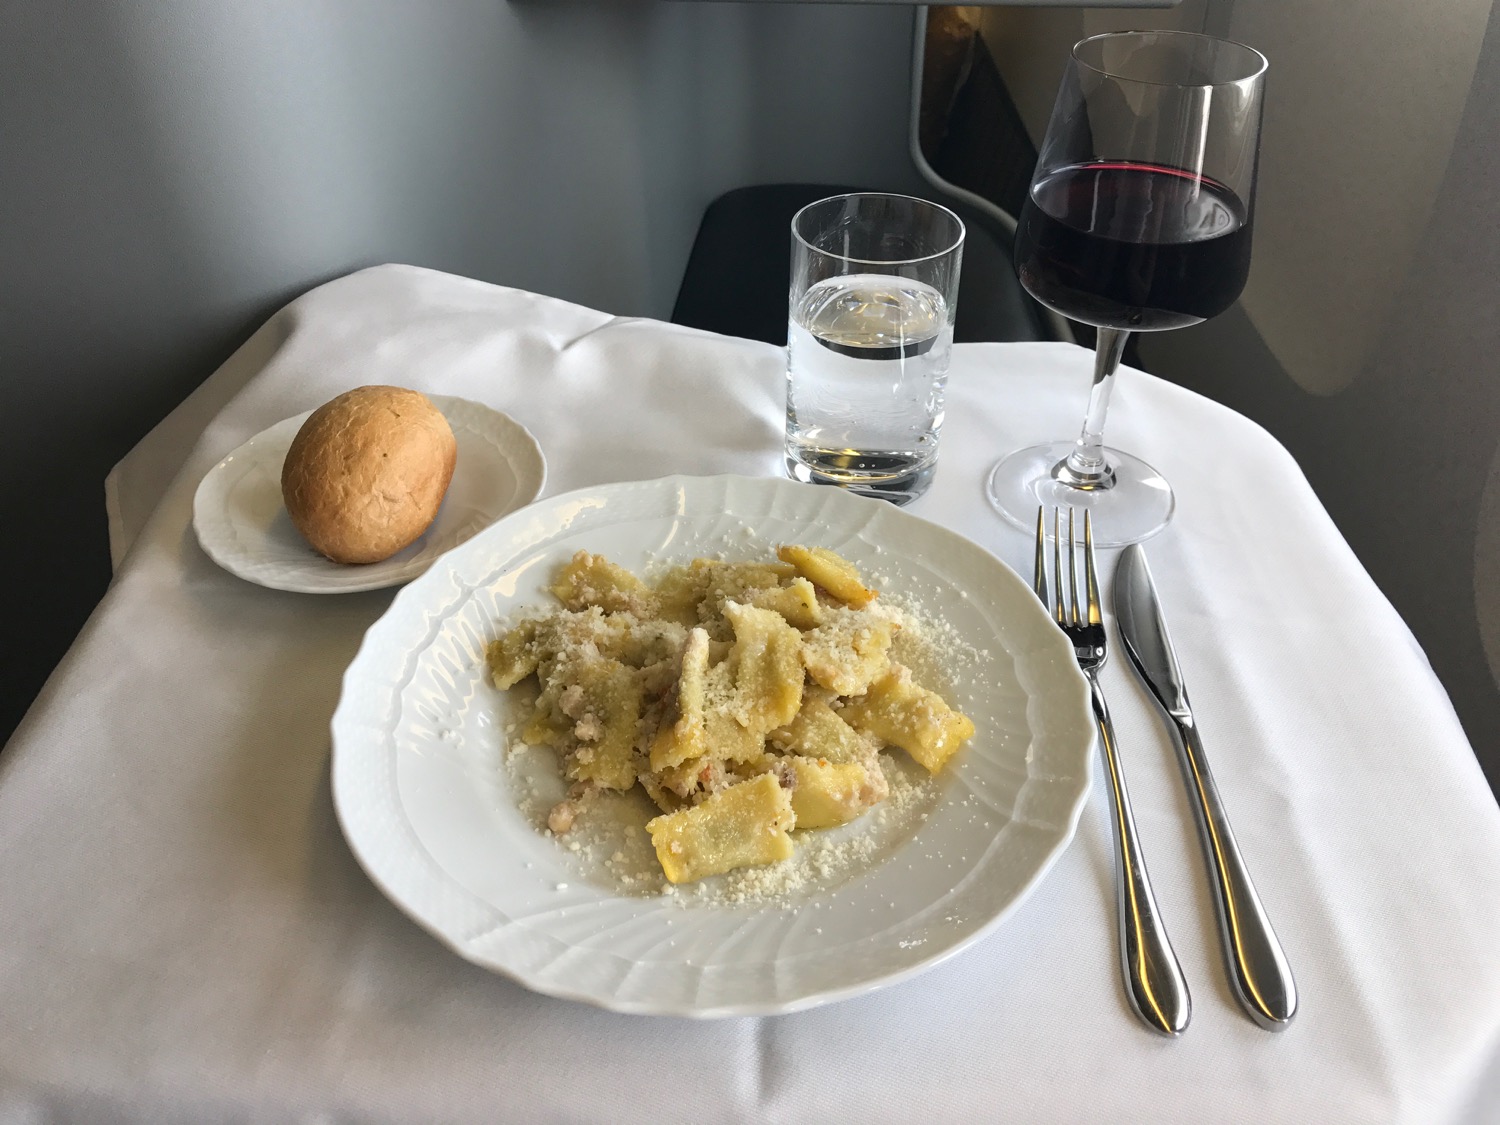 a plate of pasta and a glass of wine